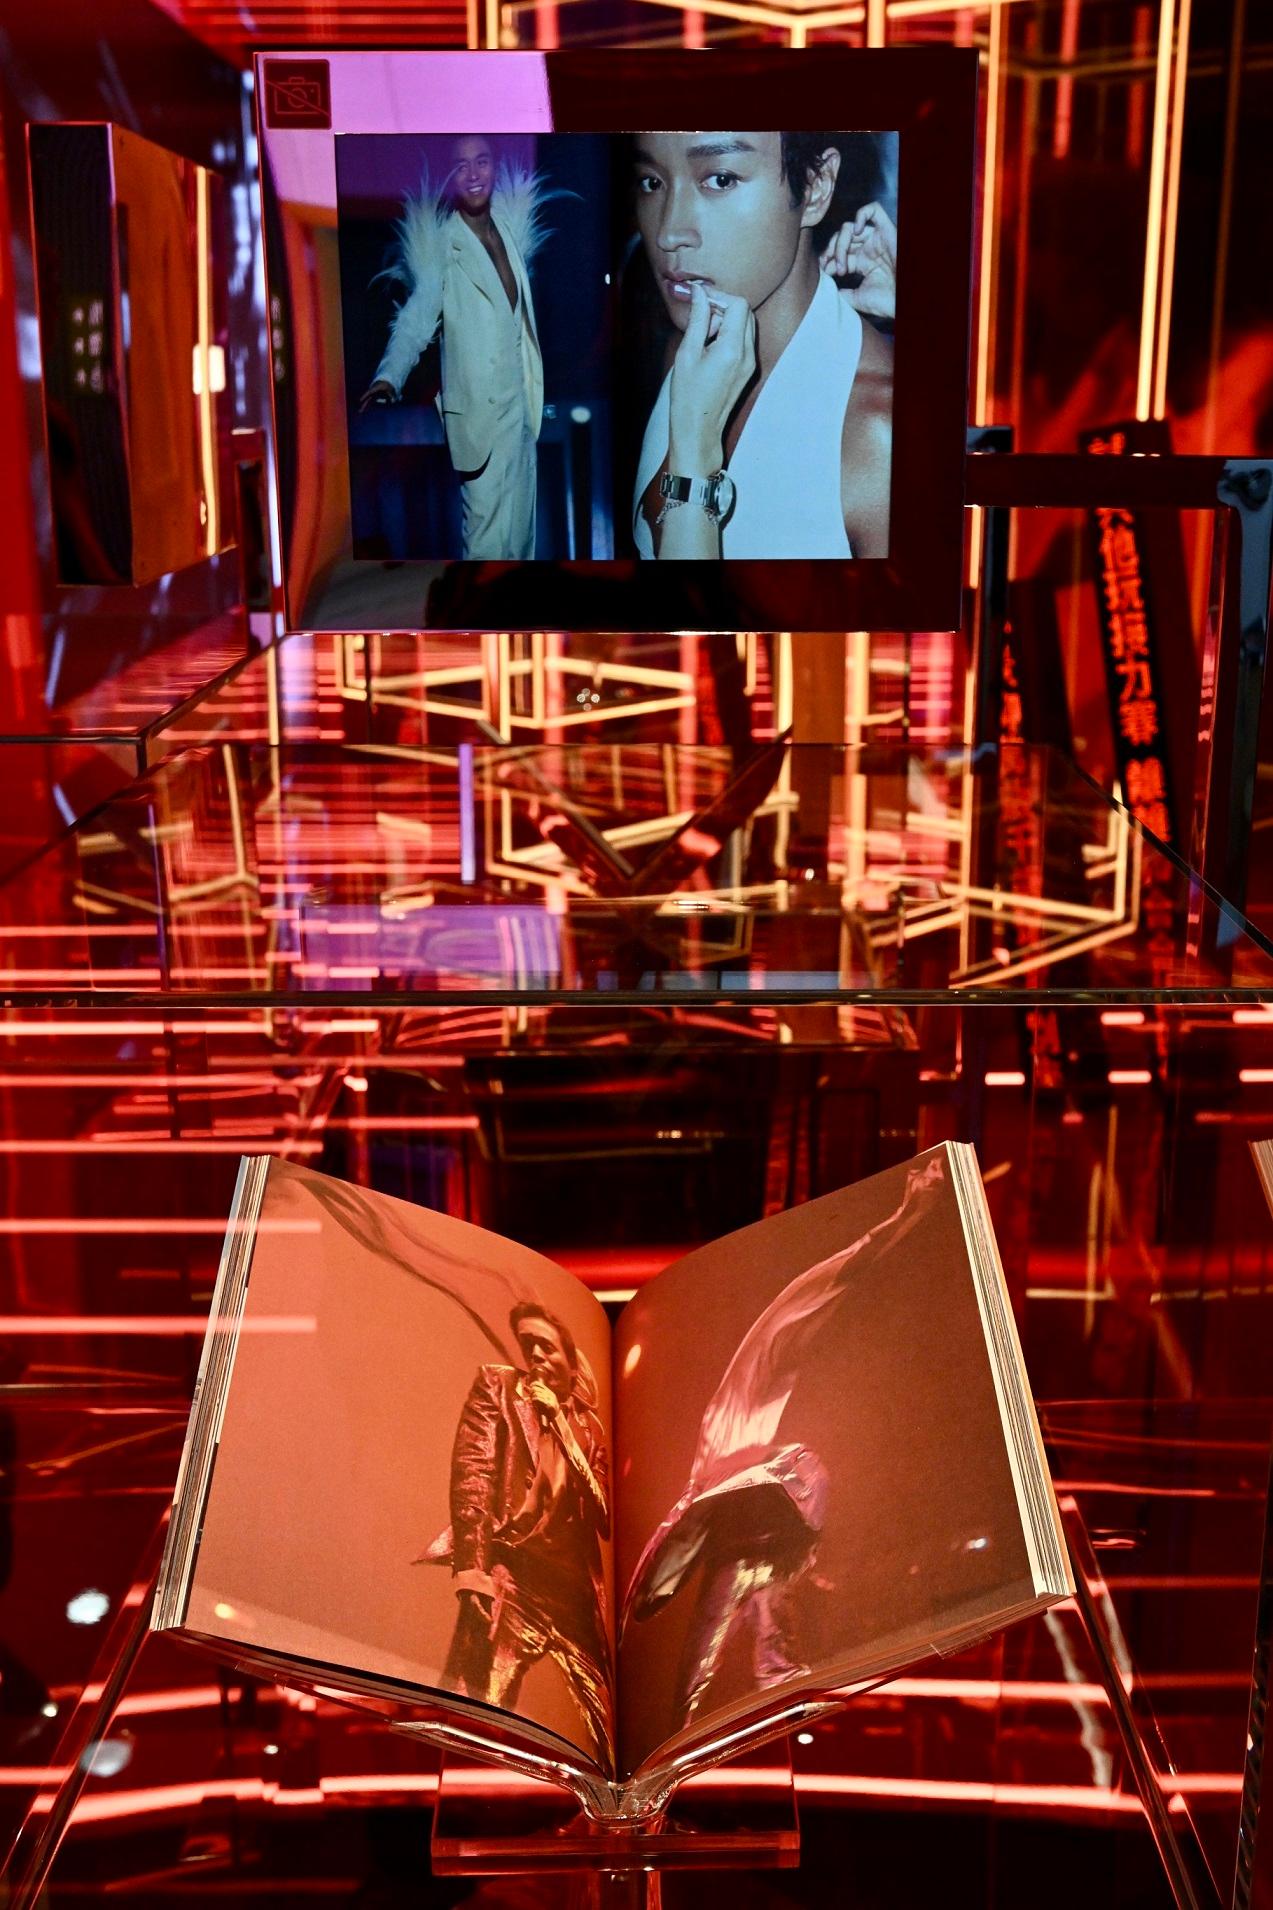 The opening ceremony for the “Miss You Much Leslie Exhibition” was held today (March 28) at the Hong Kong Heritage Museum. Photo shows Leslie Cheung’s photo album “Celebration” photographed by Mr Wing Shya.
